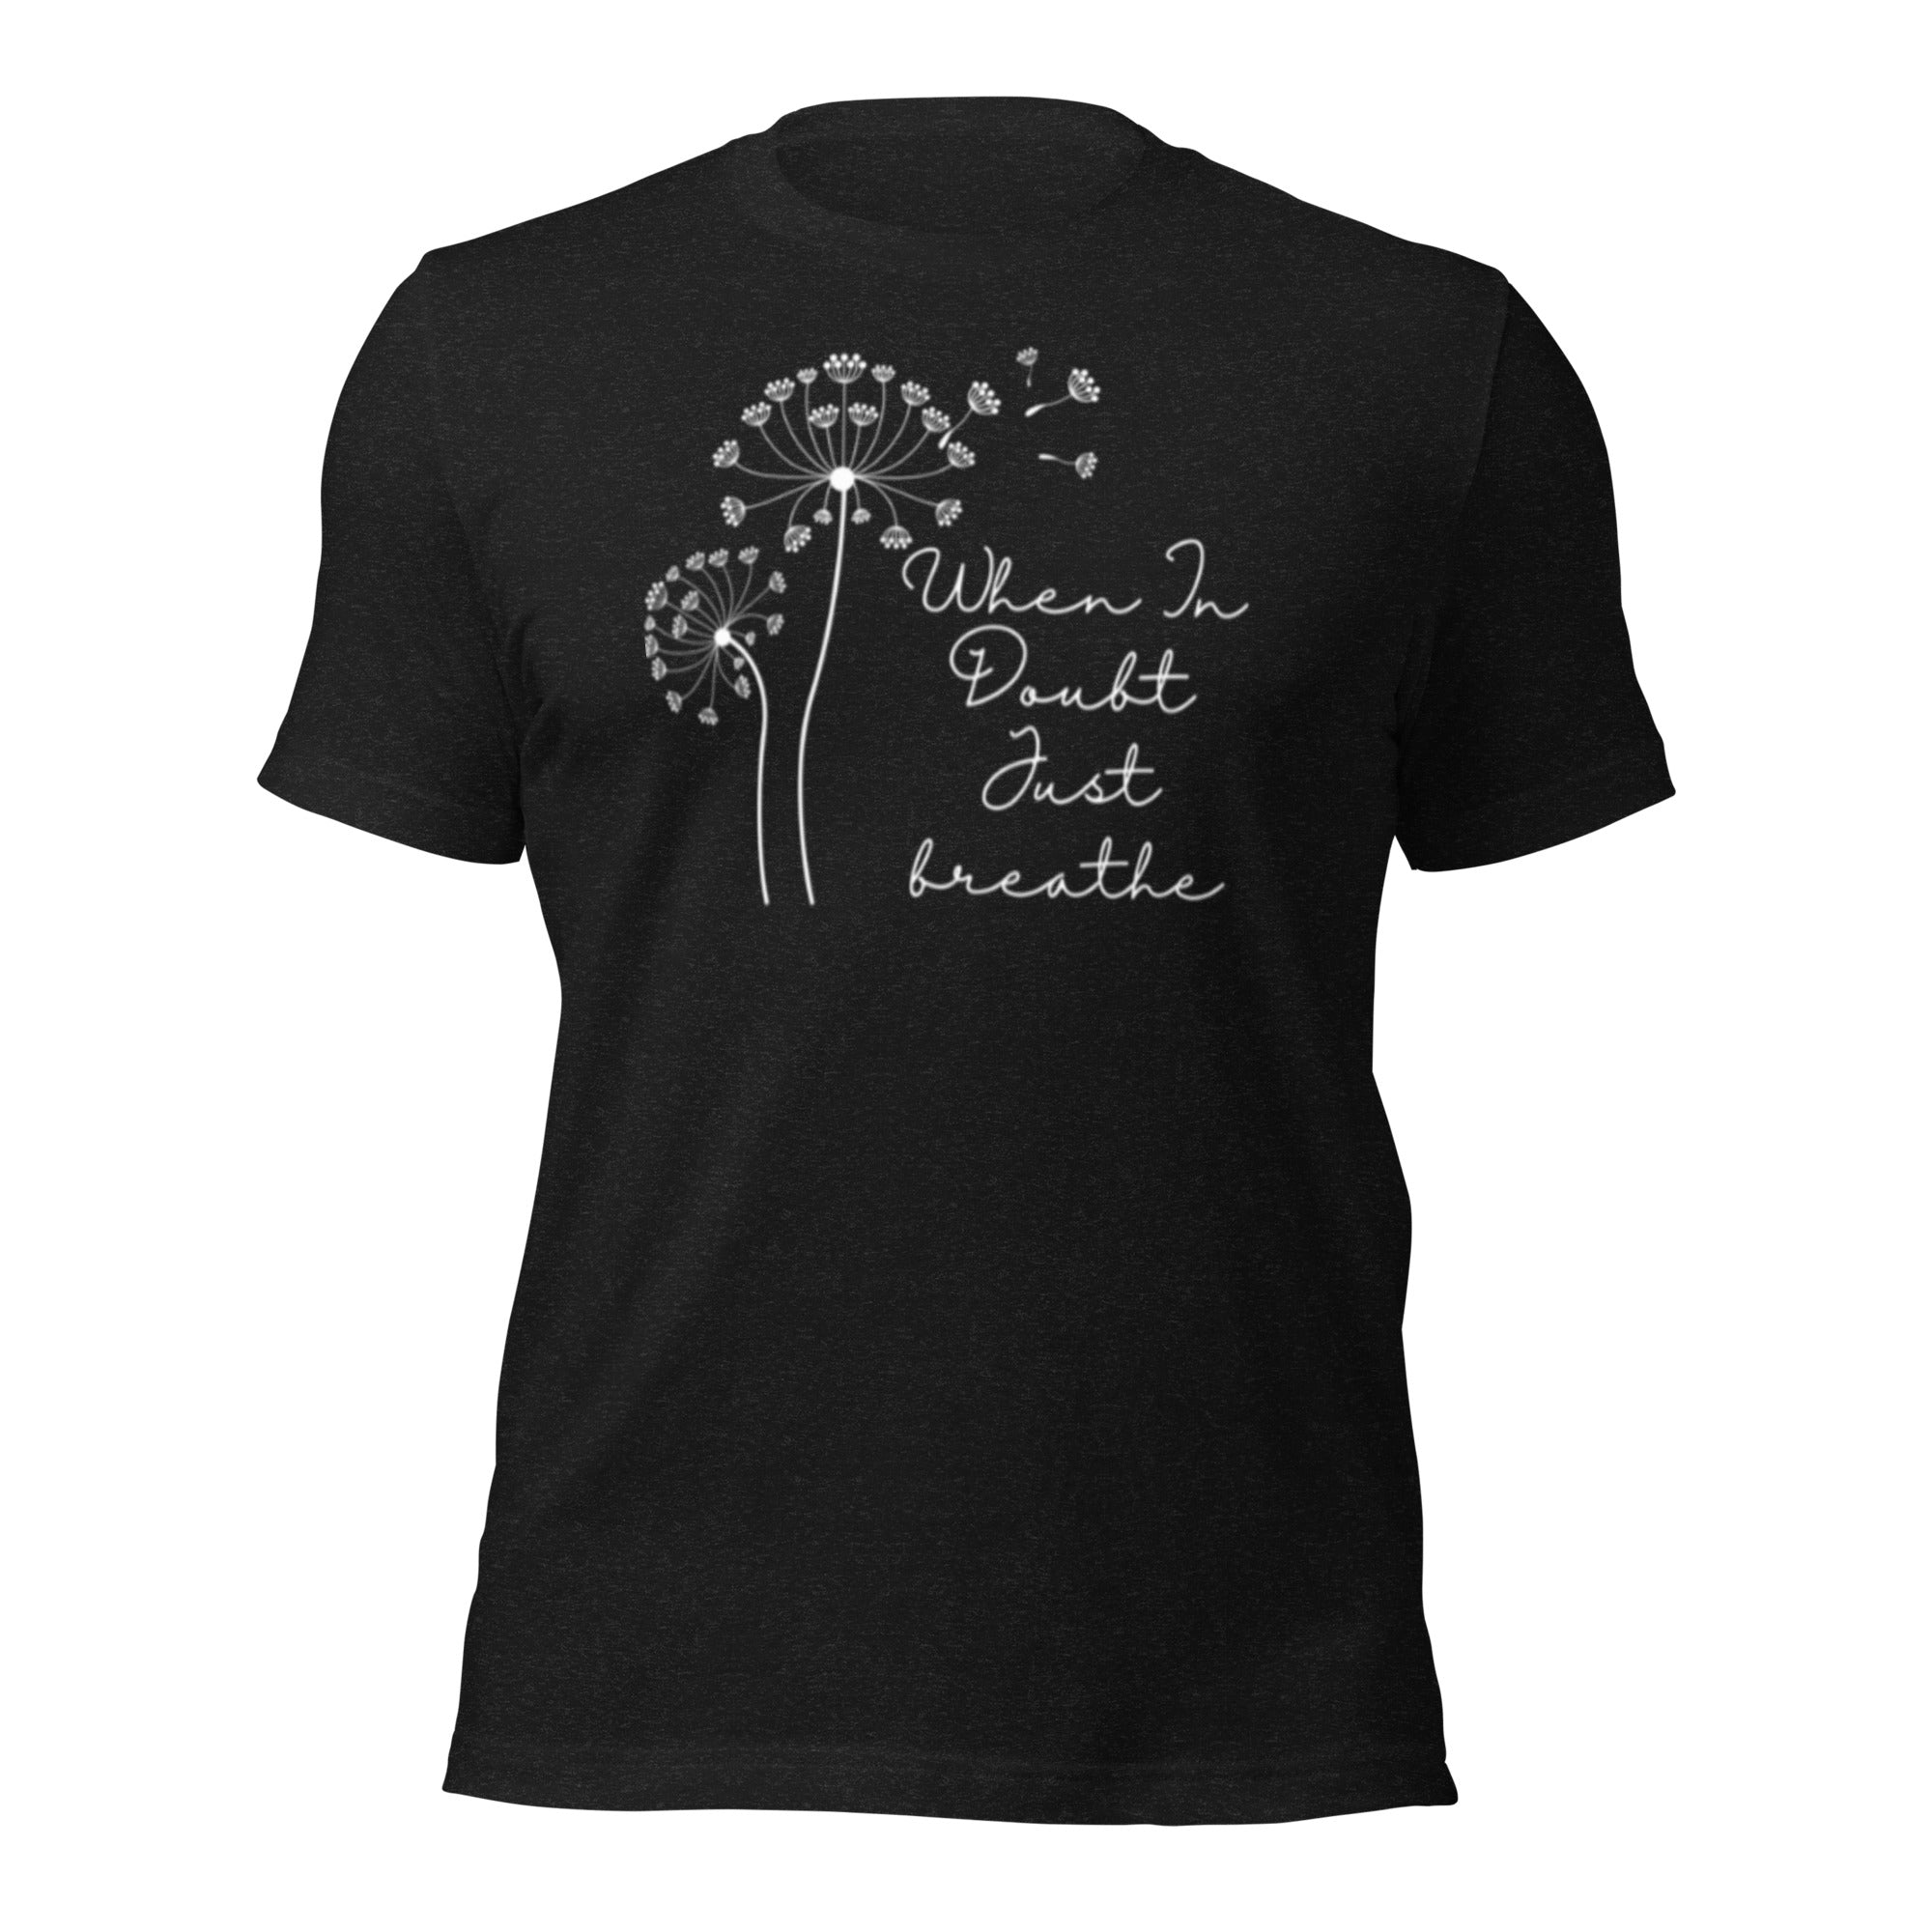 Yoga Gift with Positive Quote - "When in Doubt, Just Breathe" T-Shirt - Meditation Shirt  - Ladies Shirt - Positive Quote- Unisex - PennyJellies